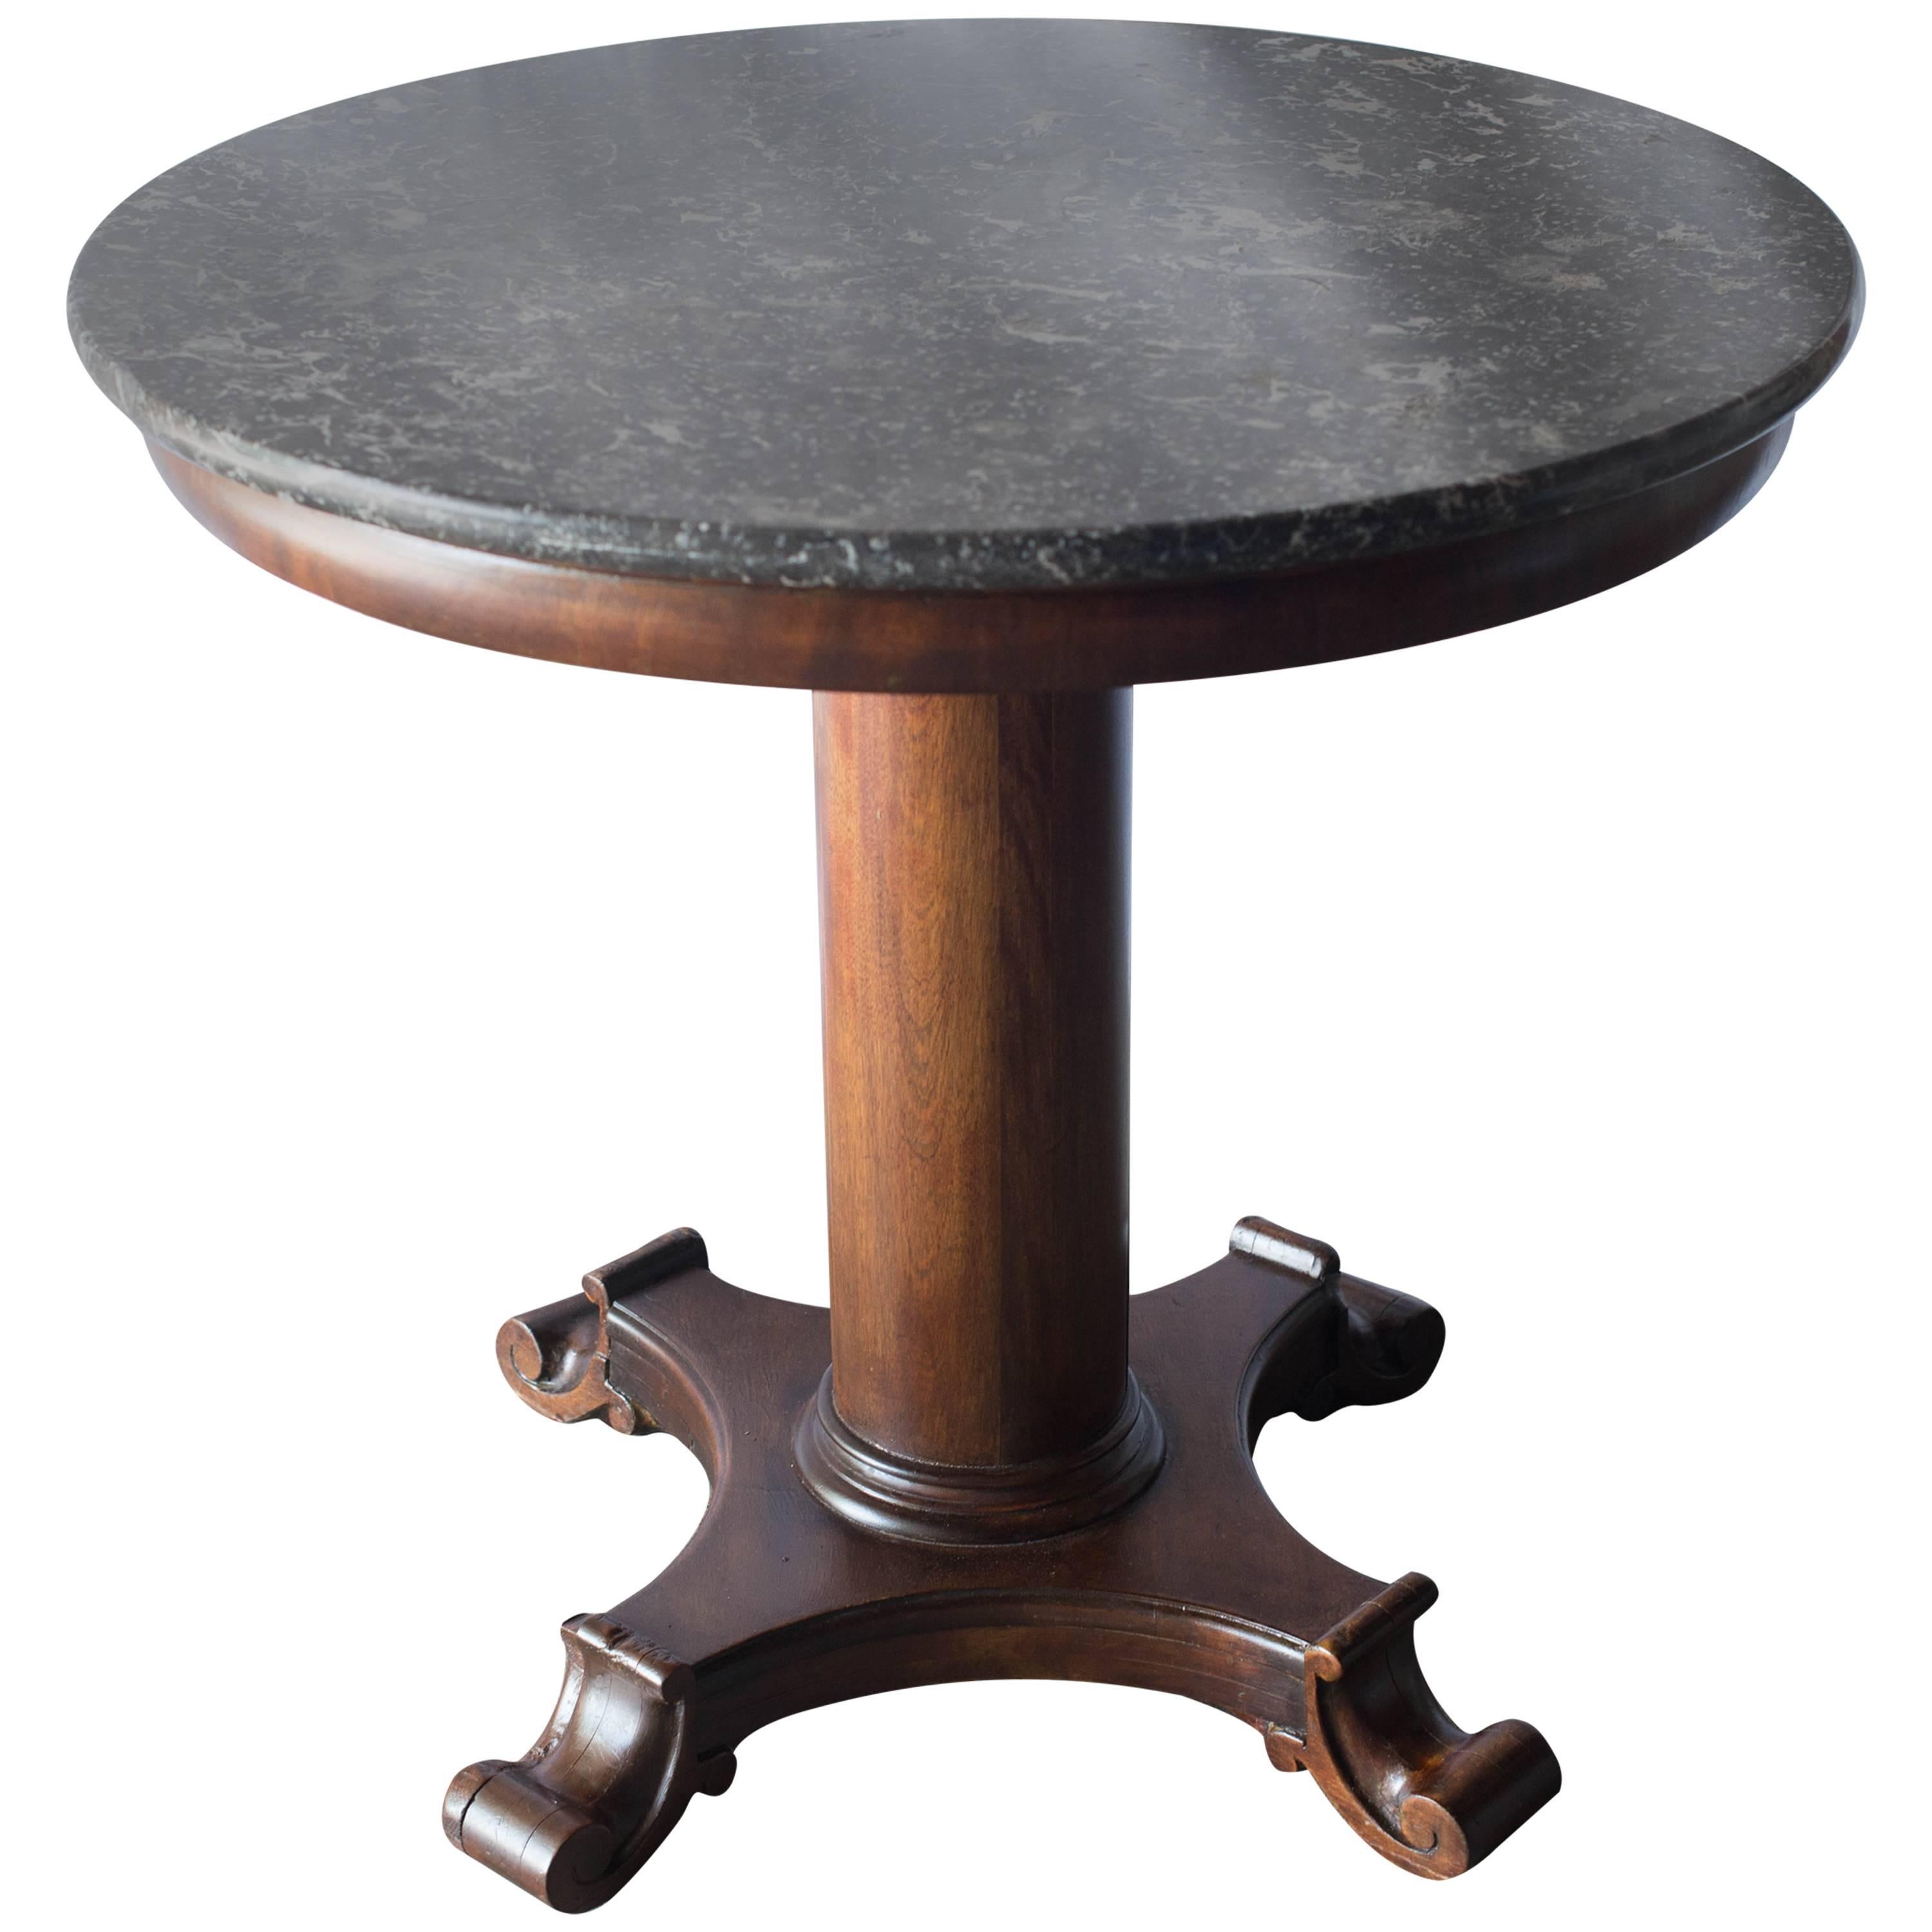 19th Century French Round Pedestal Table with Marble Top